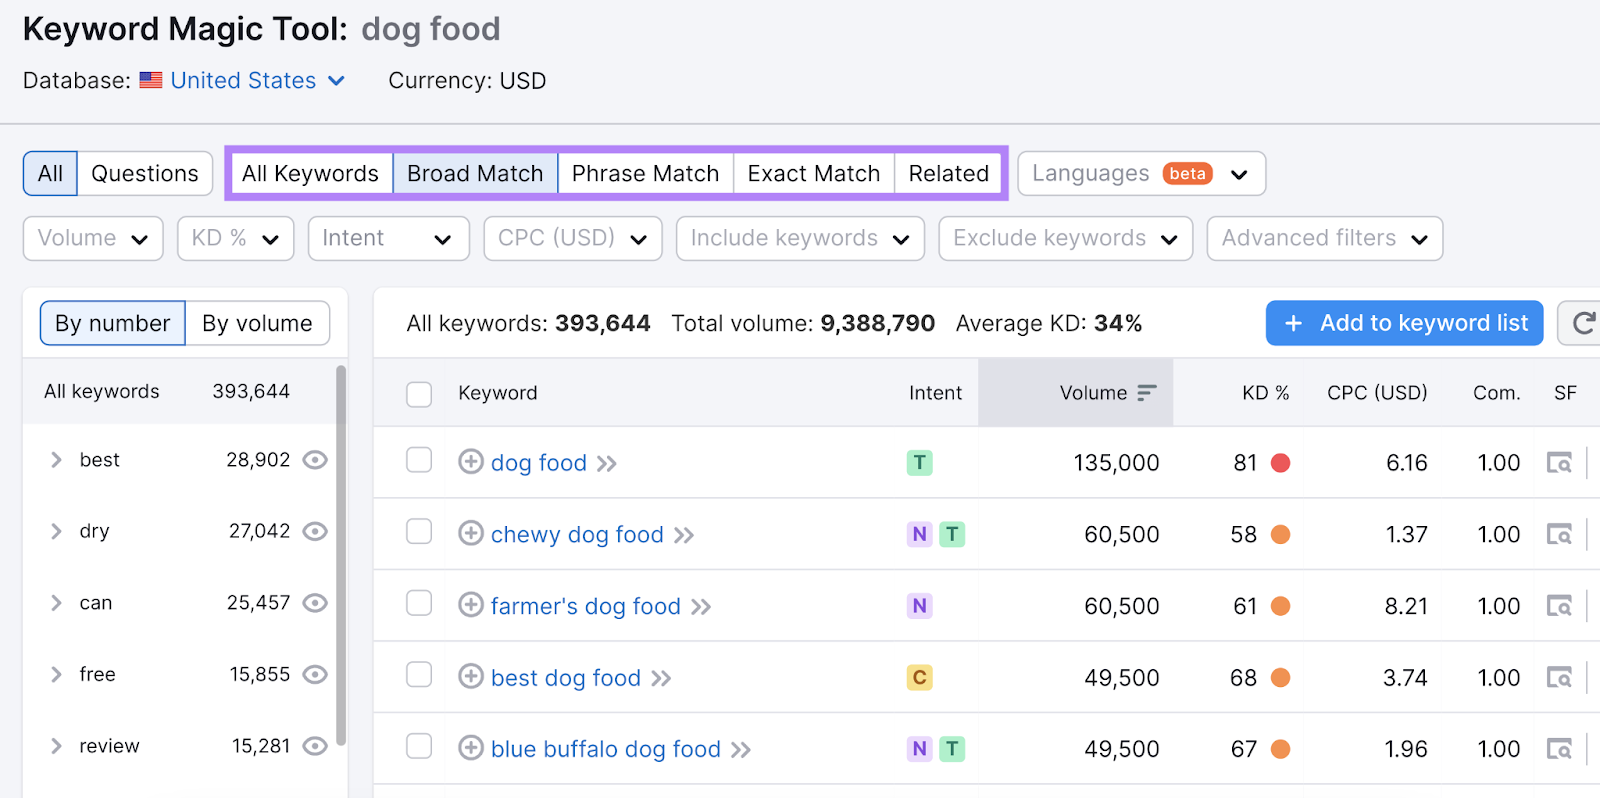 "All Keywords," "Broad Match," "Phrase Match," "Exact Match," and "Related" results highlighted successful  Keyword Magic Tool